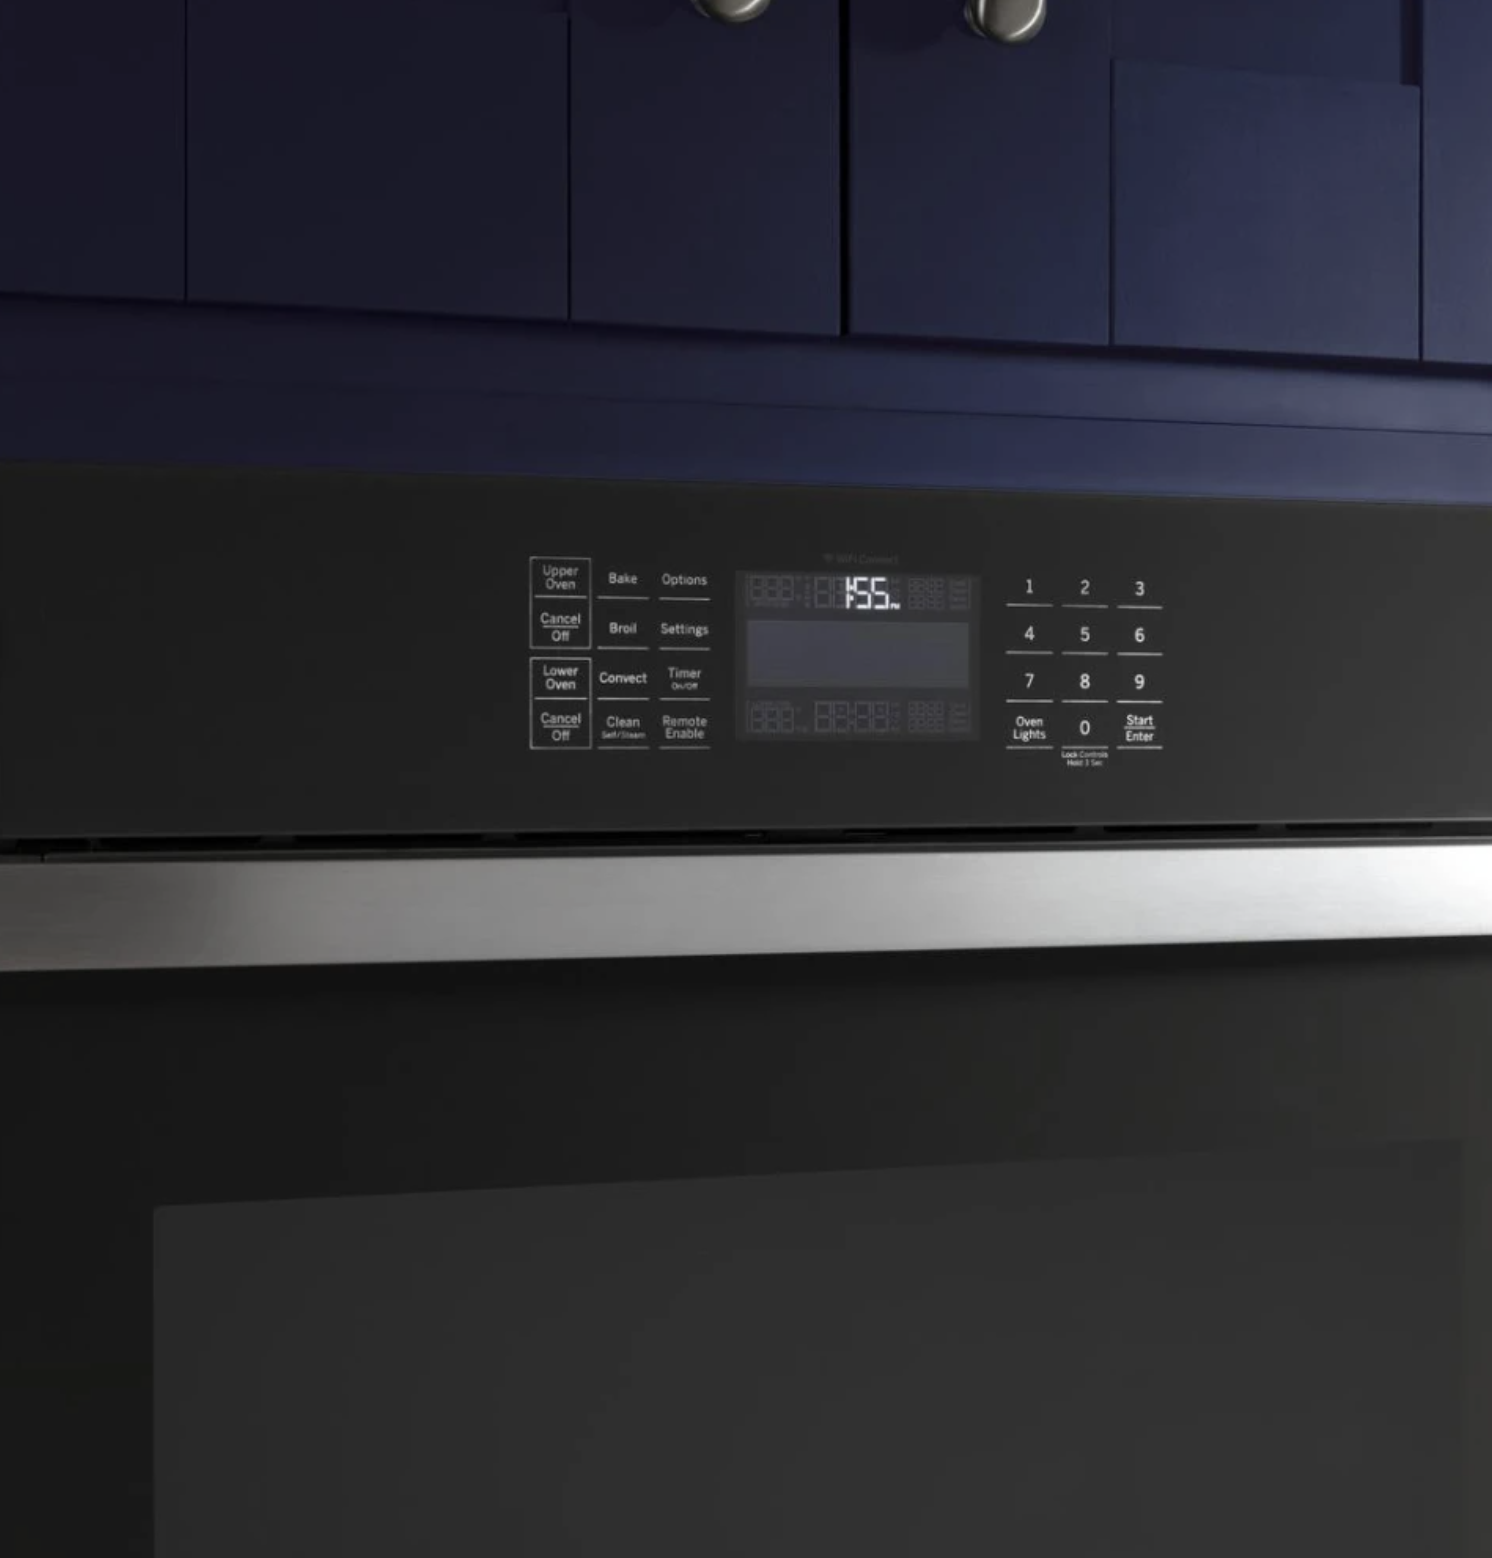 sabbath mode on a wall oven